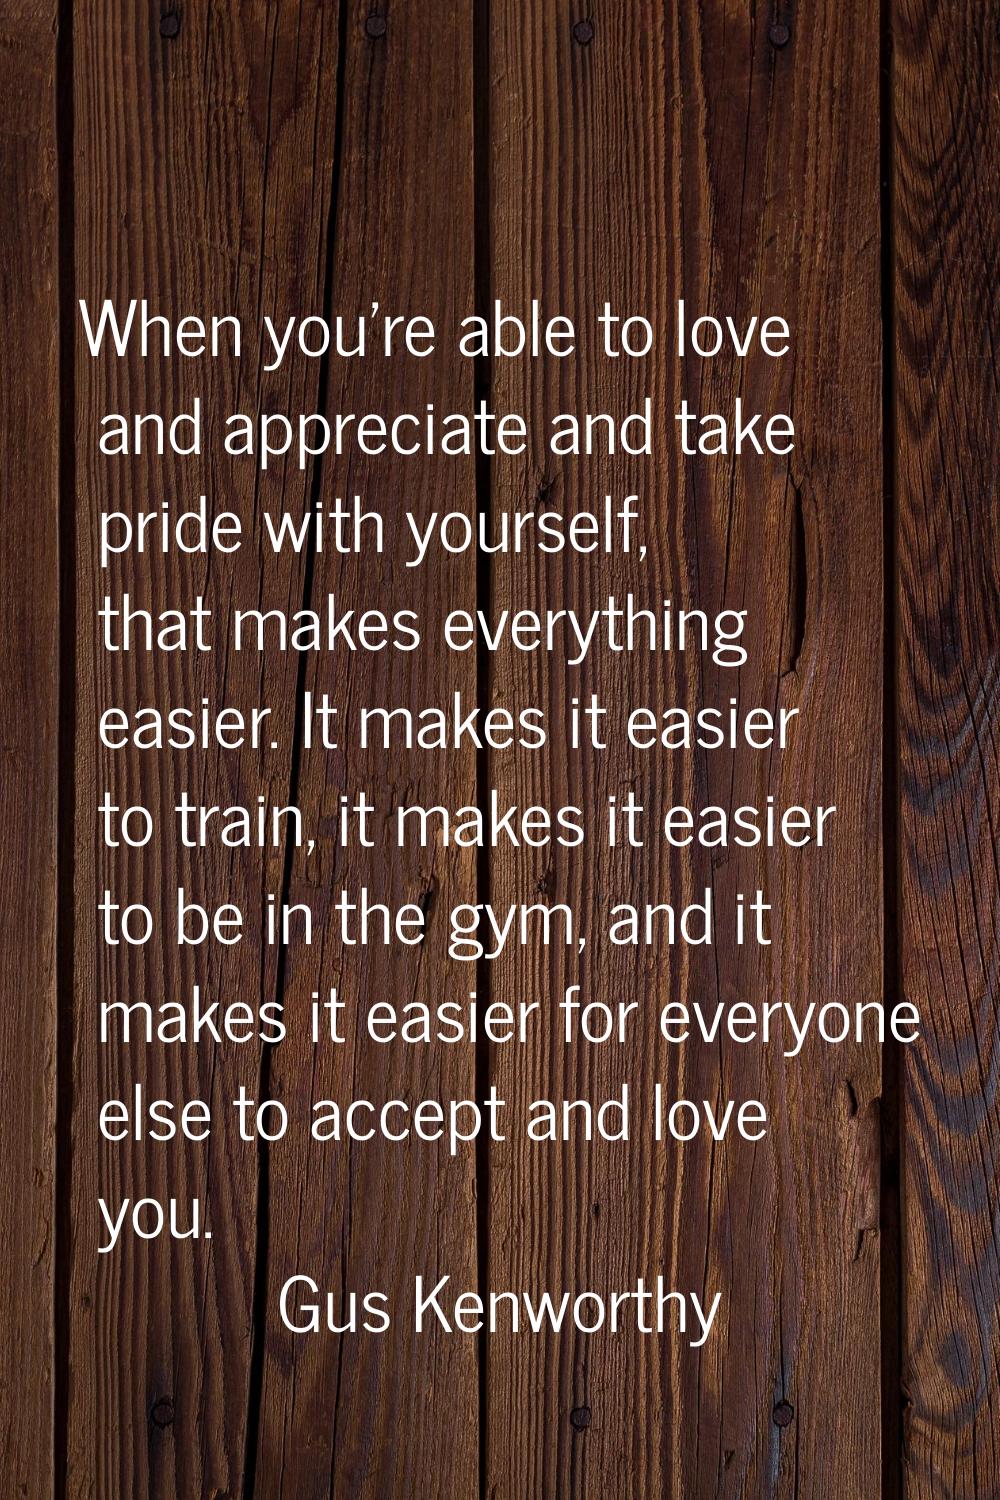 When you're able to love and appreciate and take pride with yourself, that makes everything easier.